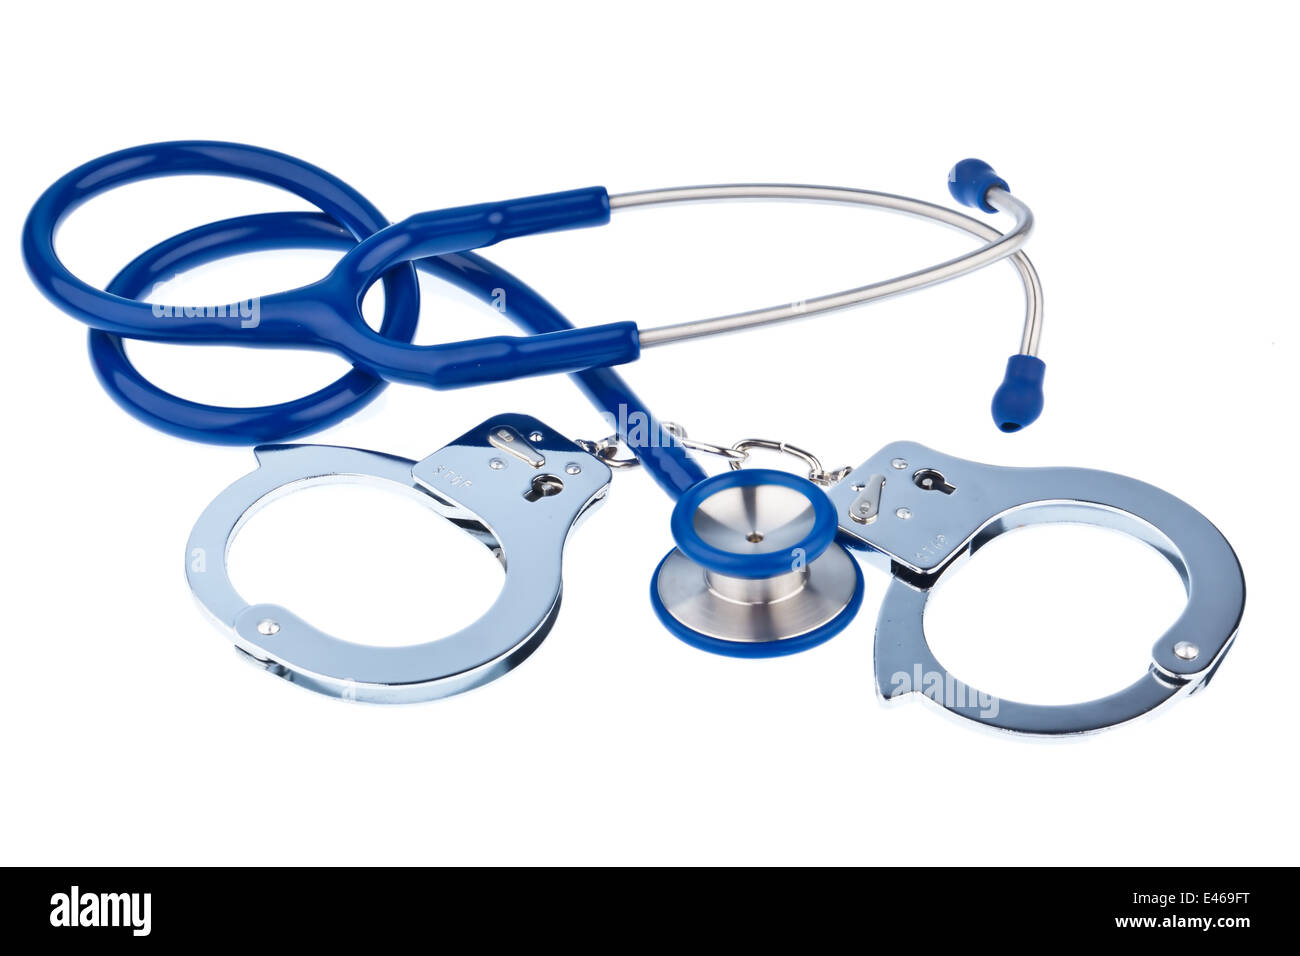 Handcuffs and a stethoscope lying on a white background. Stock Photo